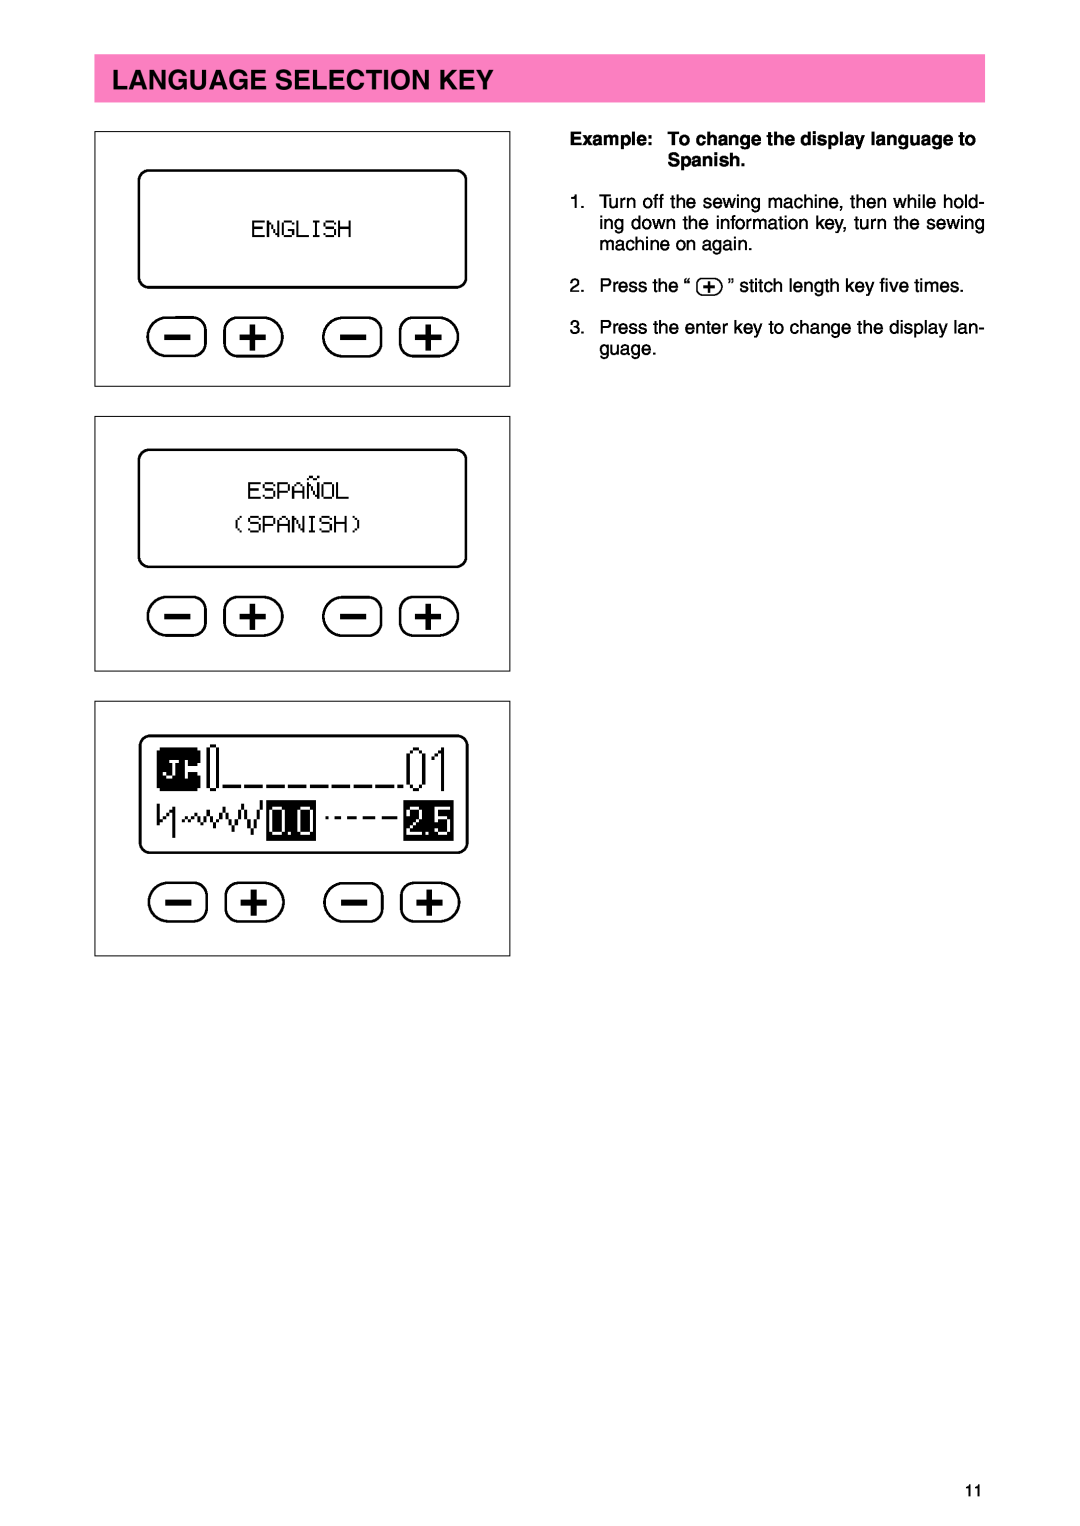 Brother PC 3000 operation manual Language Selection Key, Example To change the display language to Spanish 